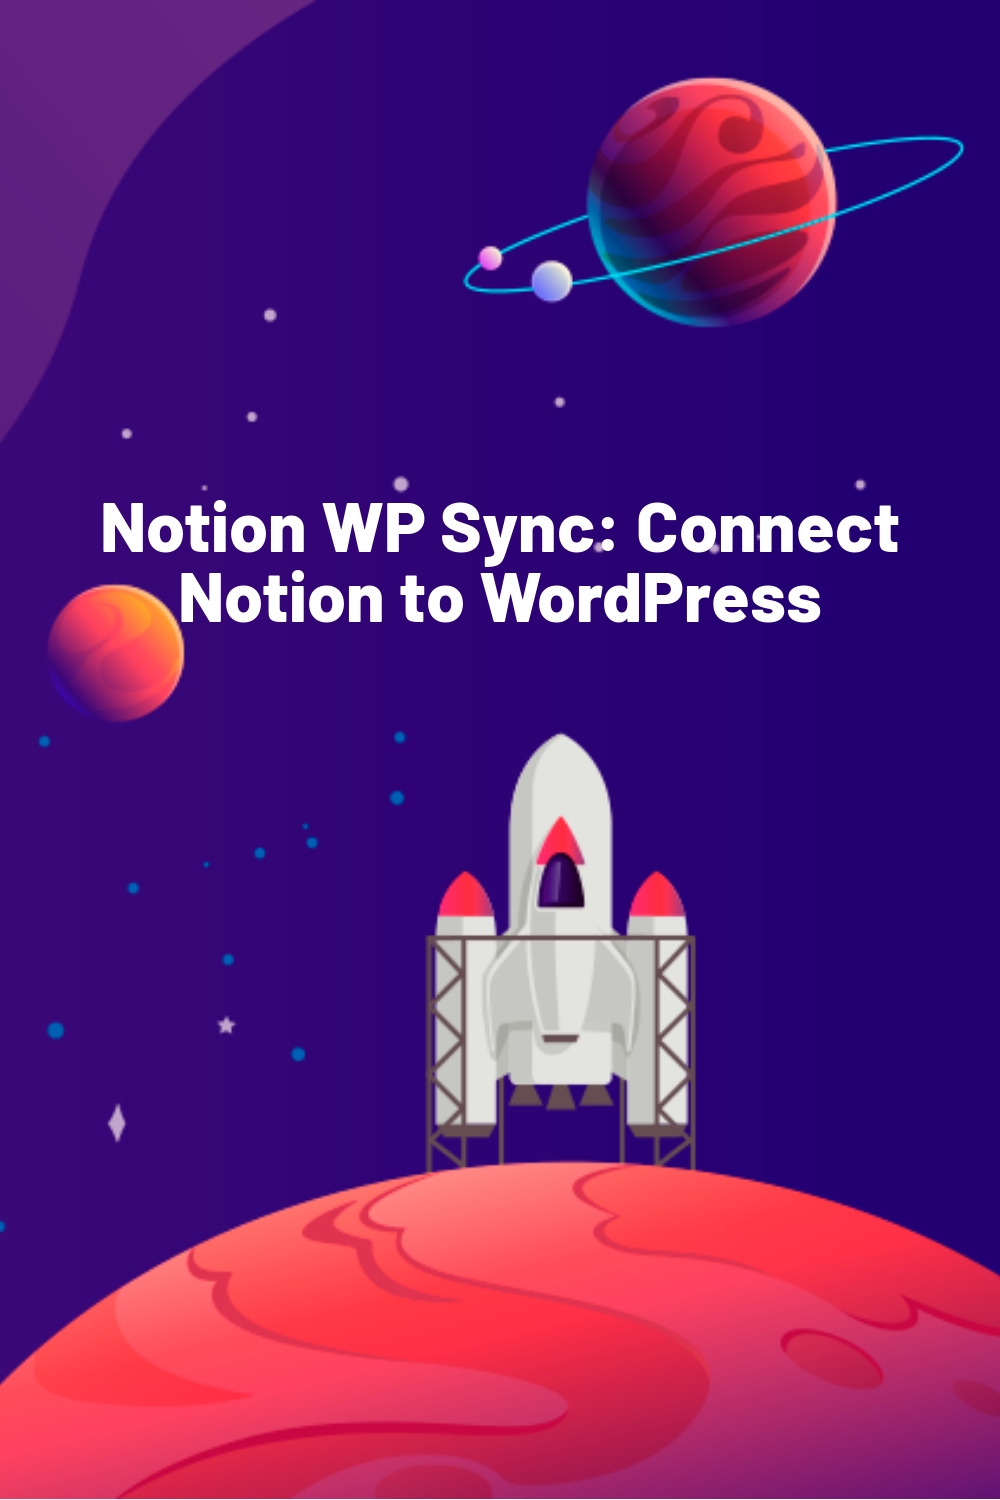 Notion WP Sync: Connect Notion to WordPress